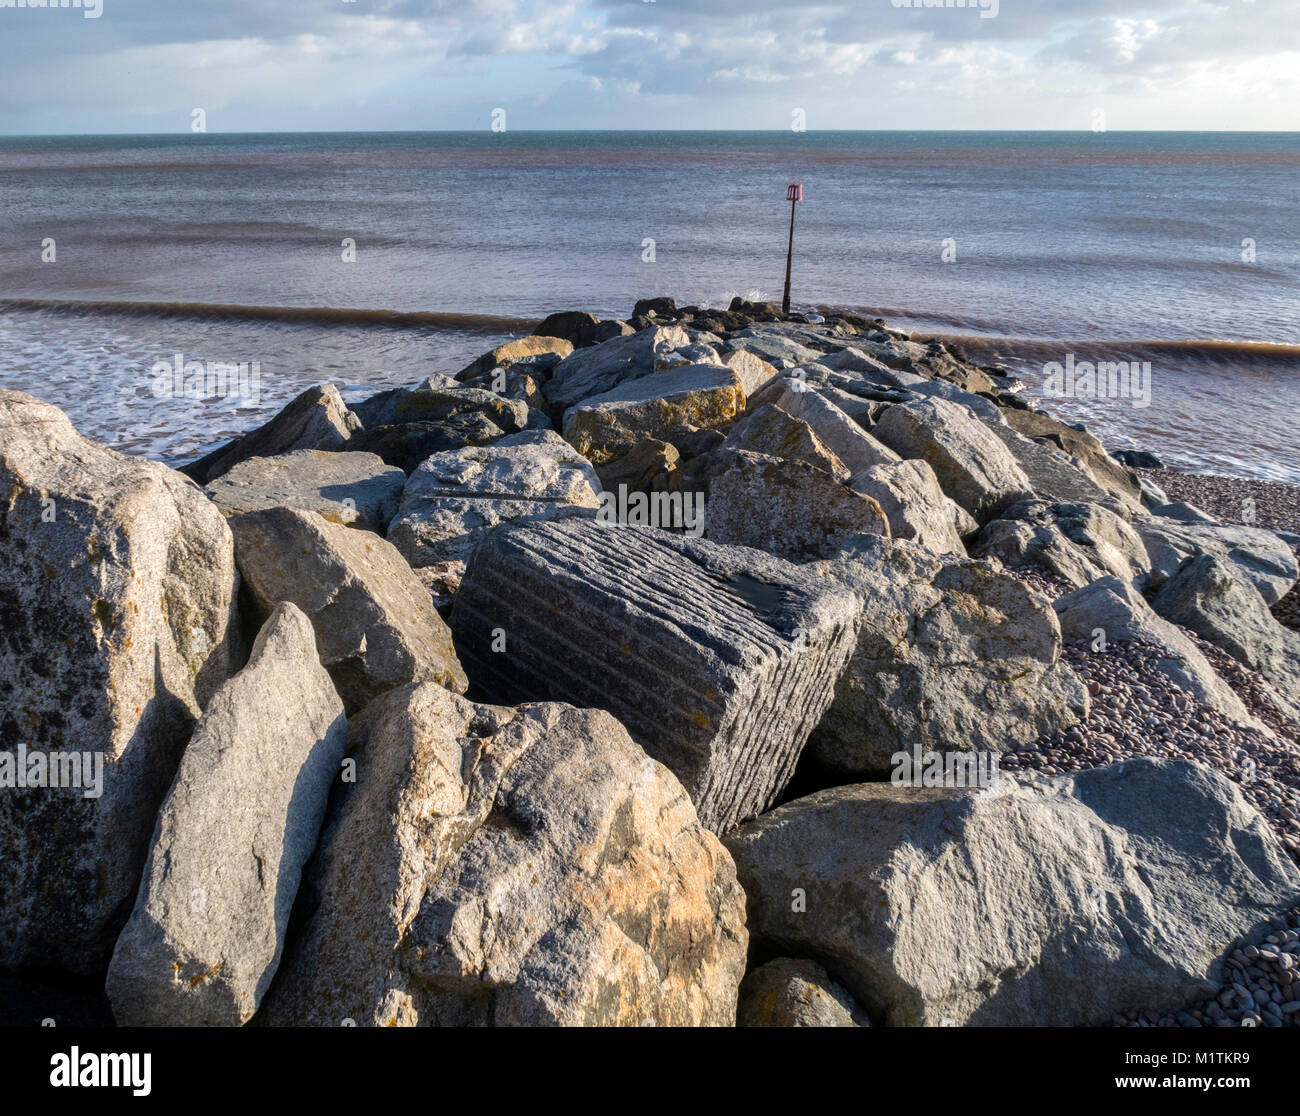 Rock sea defences on the beach at Sidmouth, Devon, England, UK. Stock Photo